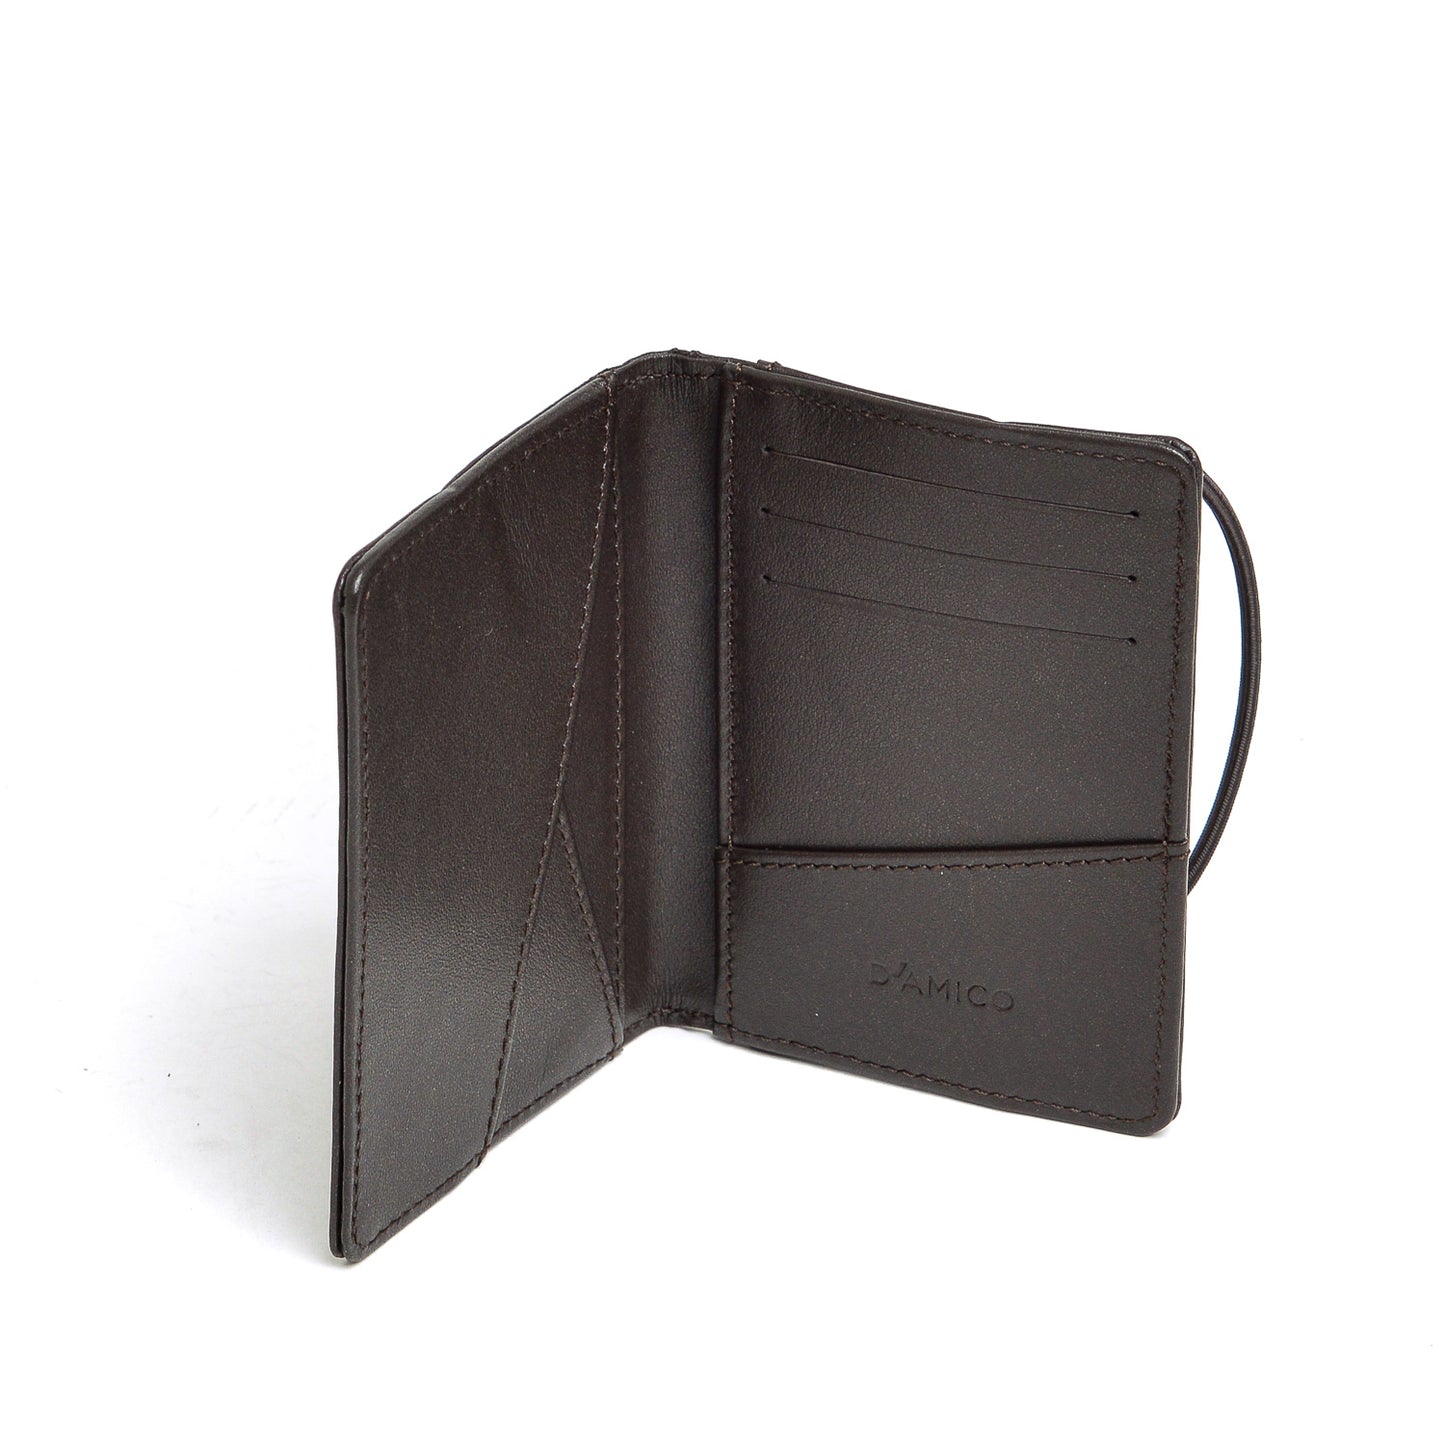 Classic Leather Dark Leather Folding Wallet